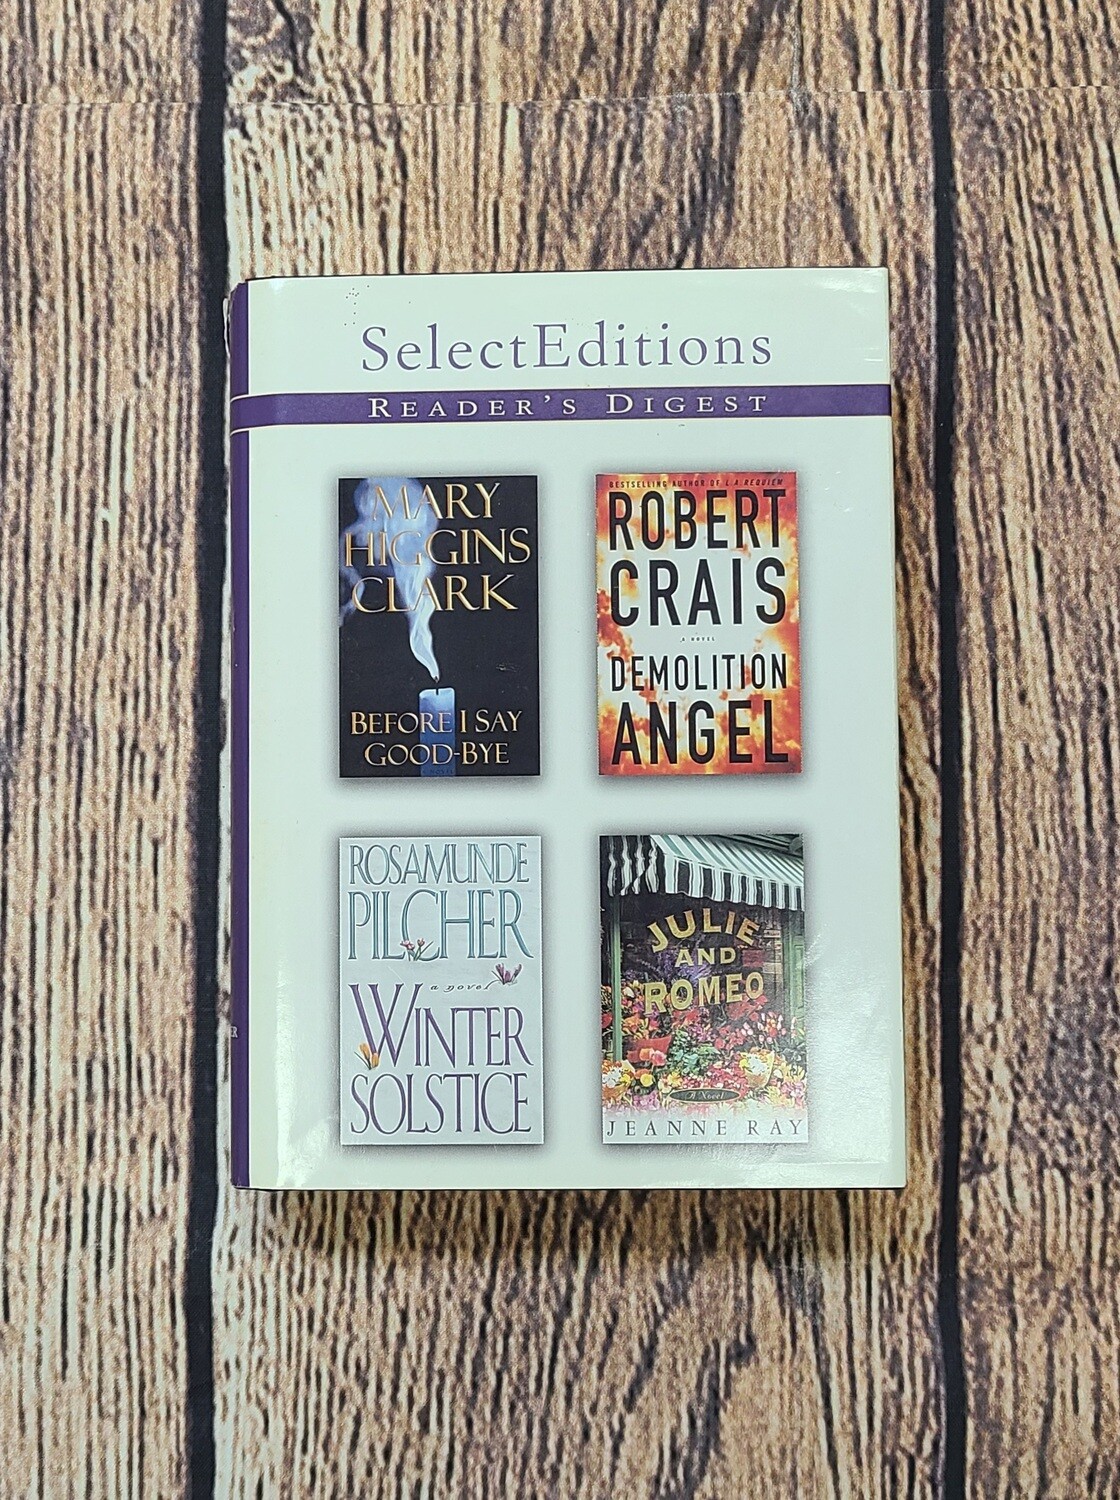 Before I Say Good-Bye, Demolition Angel, Winter Solstice, and Julie and Romeo by Reader's Digest